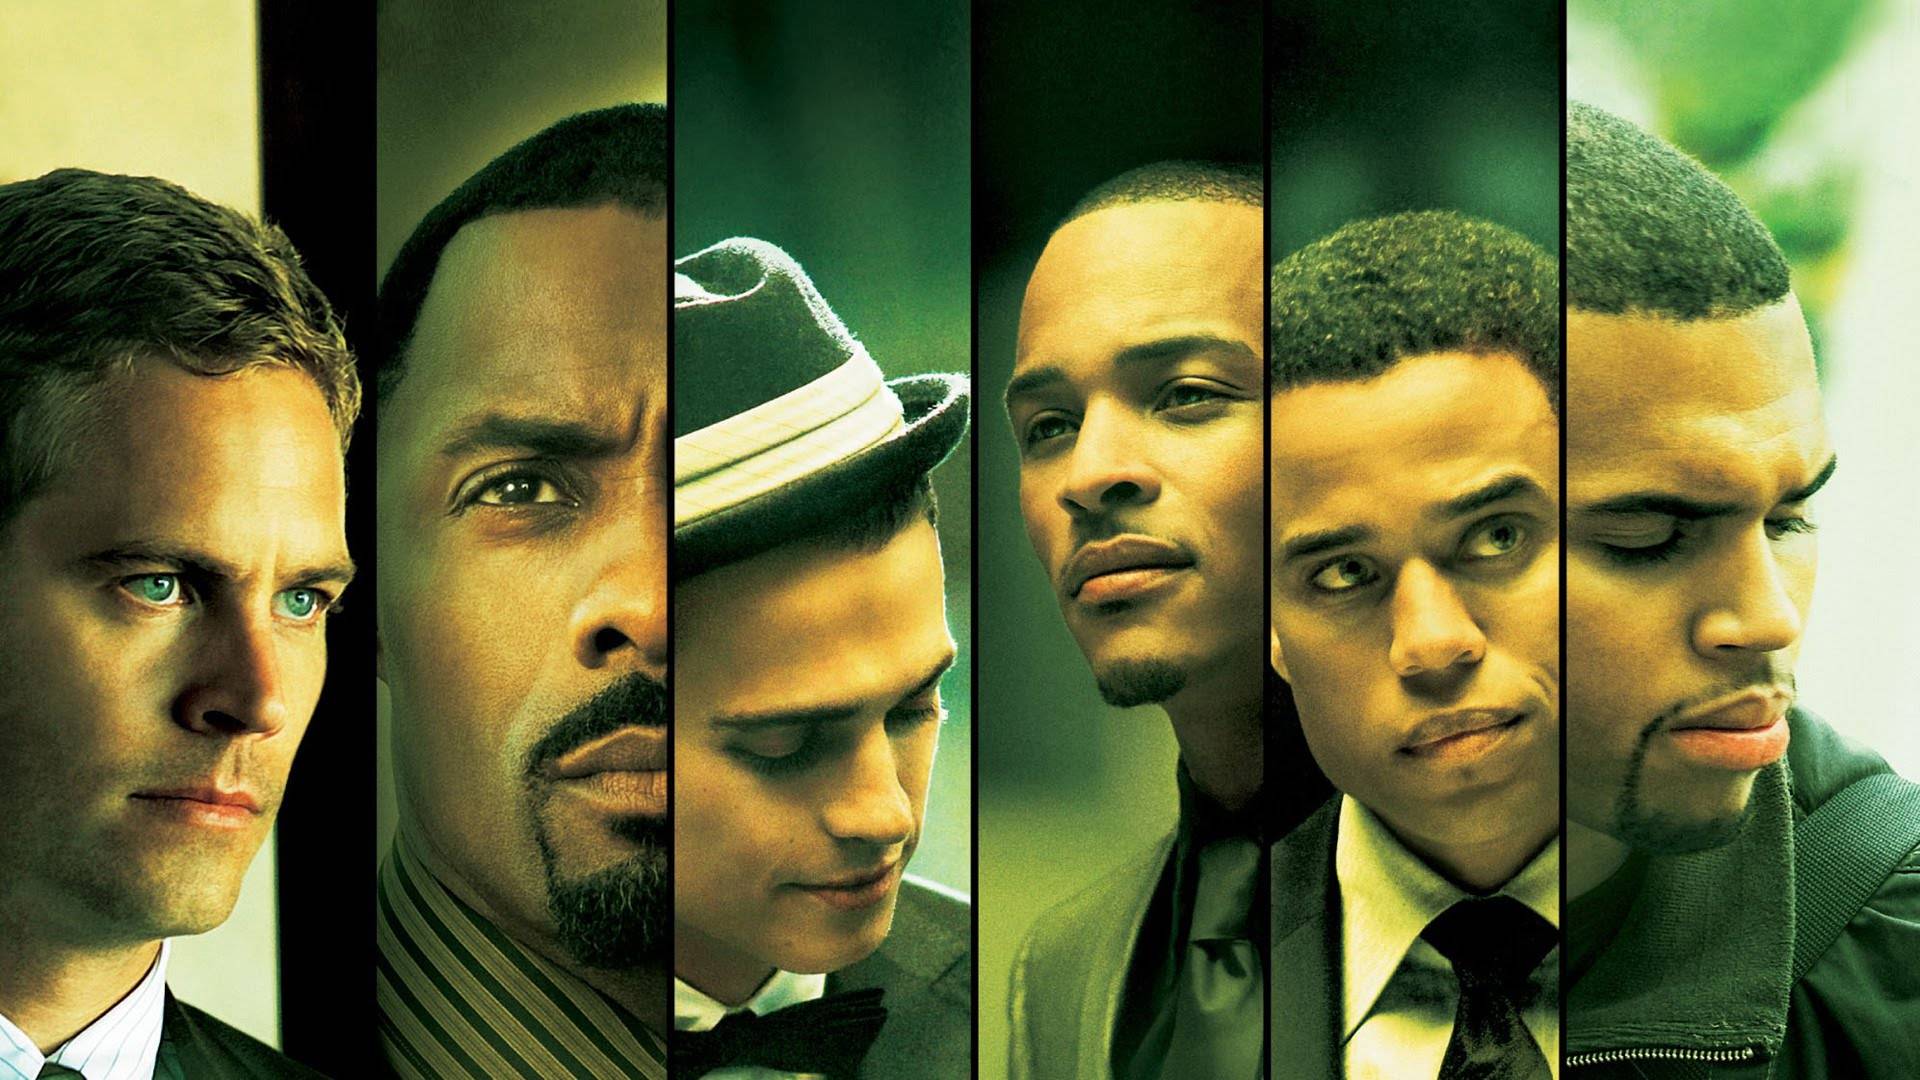 Takers / Takers (2010)